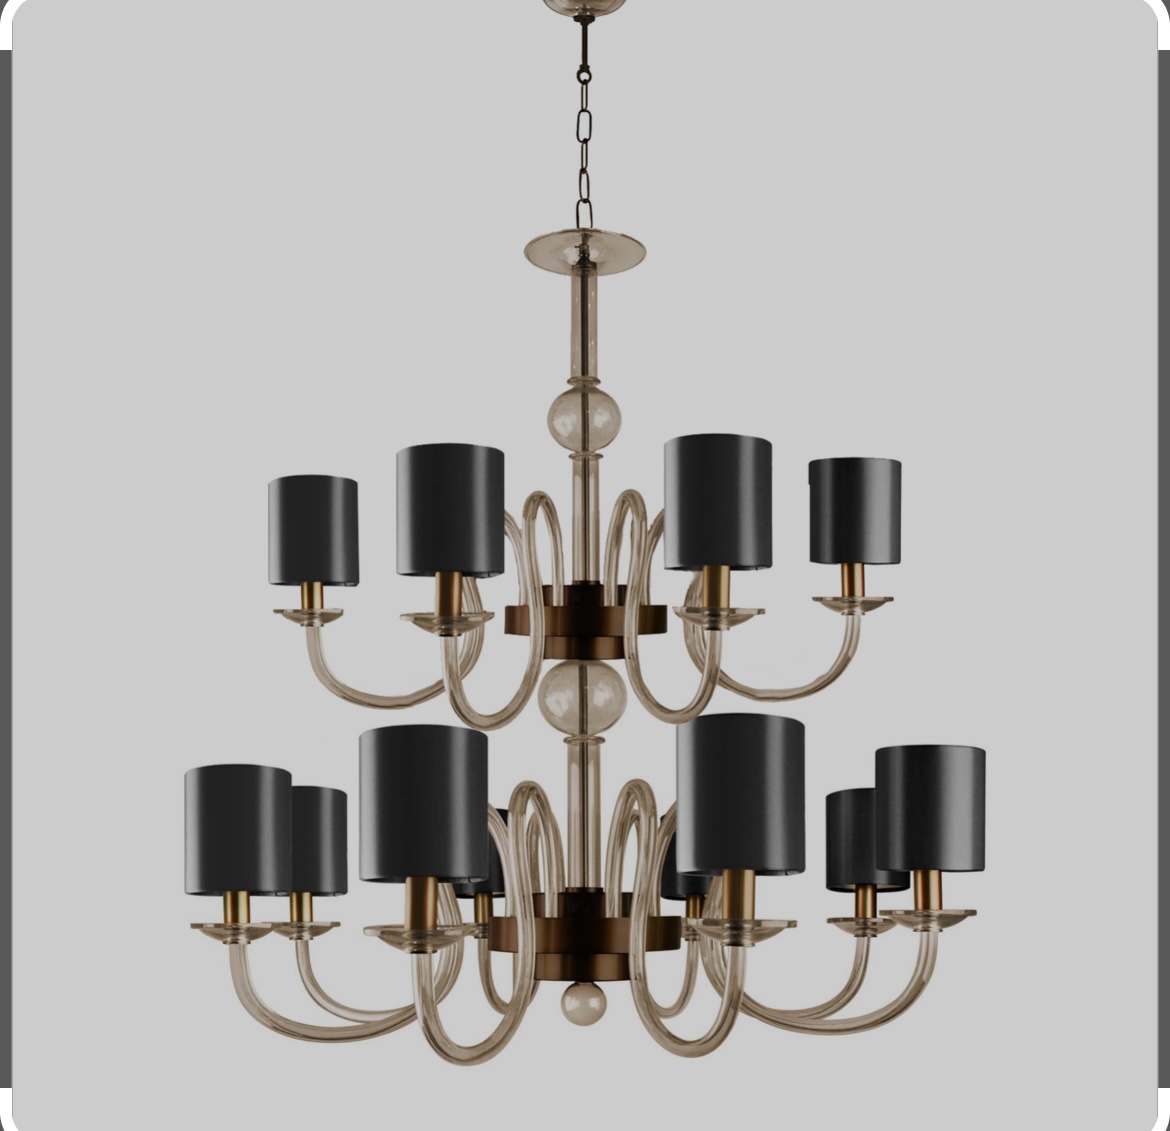 A 'Cole' matt gold and shade truffle chandelier by Villaverde